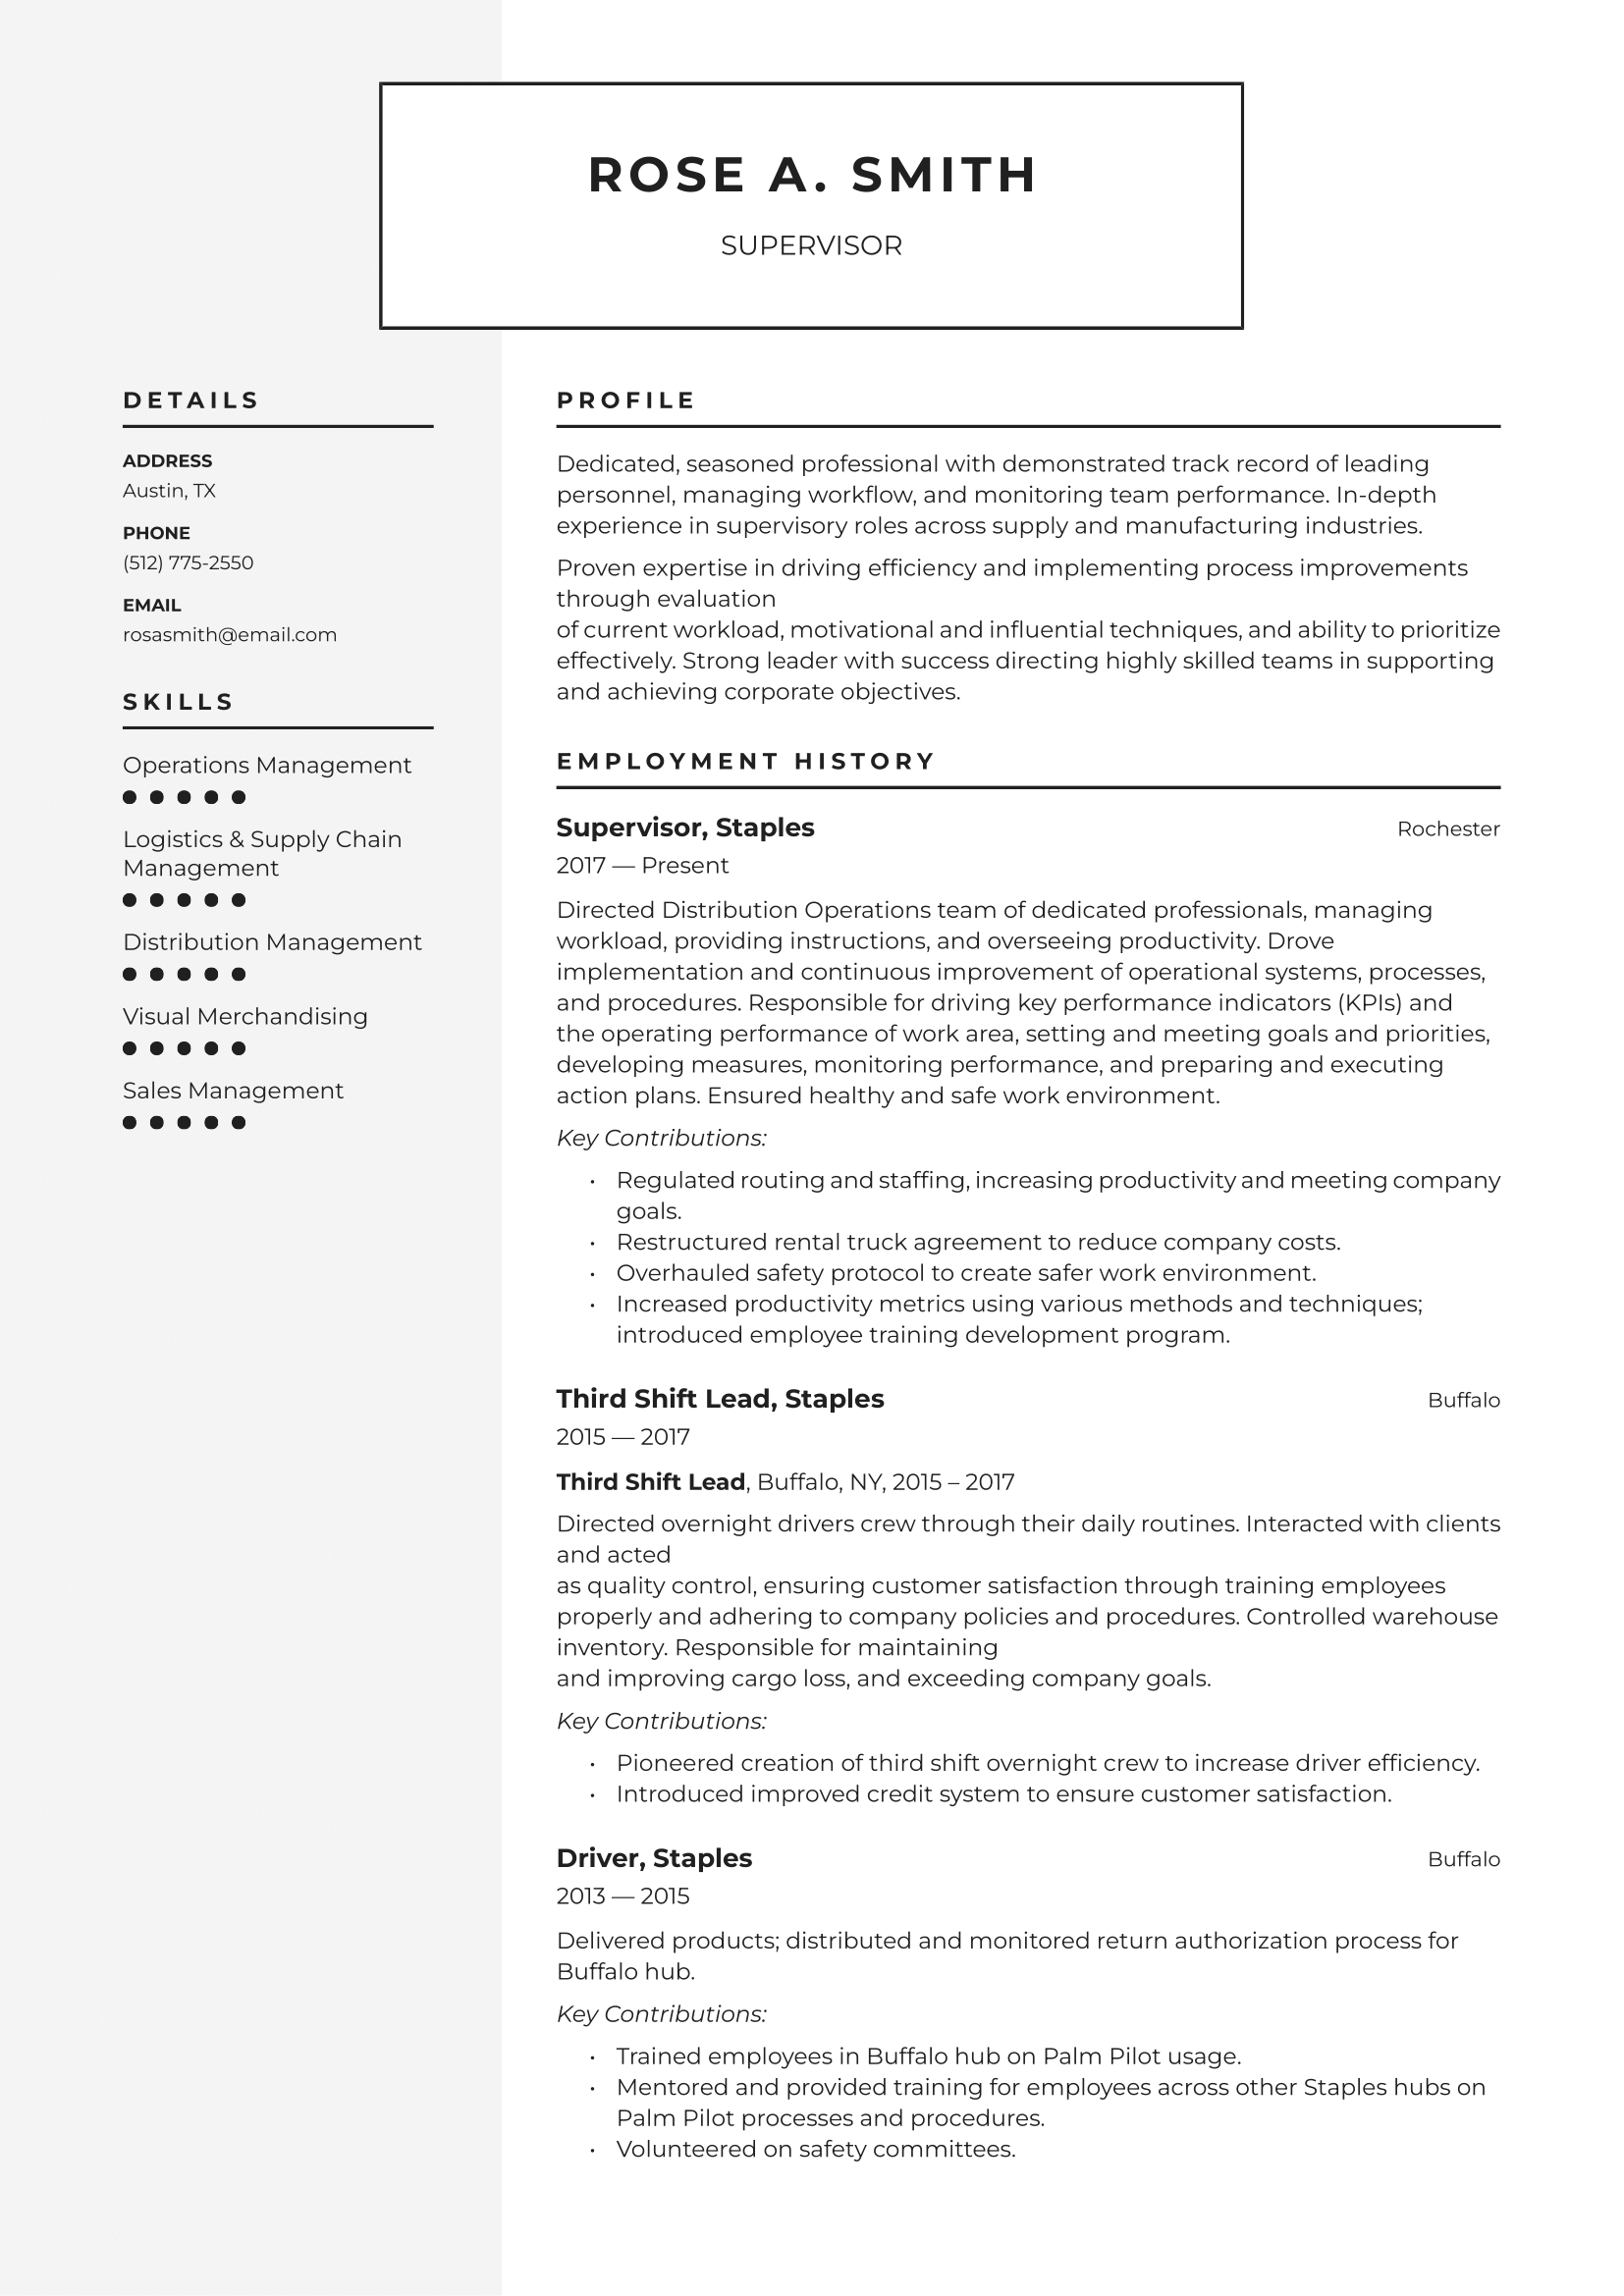 Supervisor-Resume-EXAMPLE.png